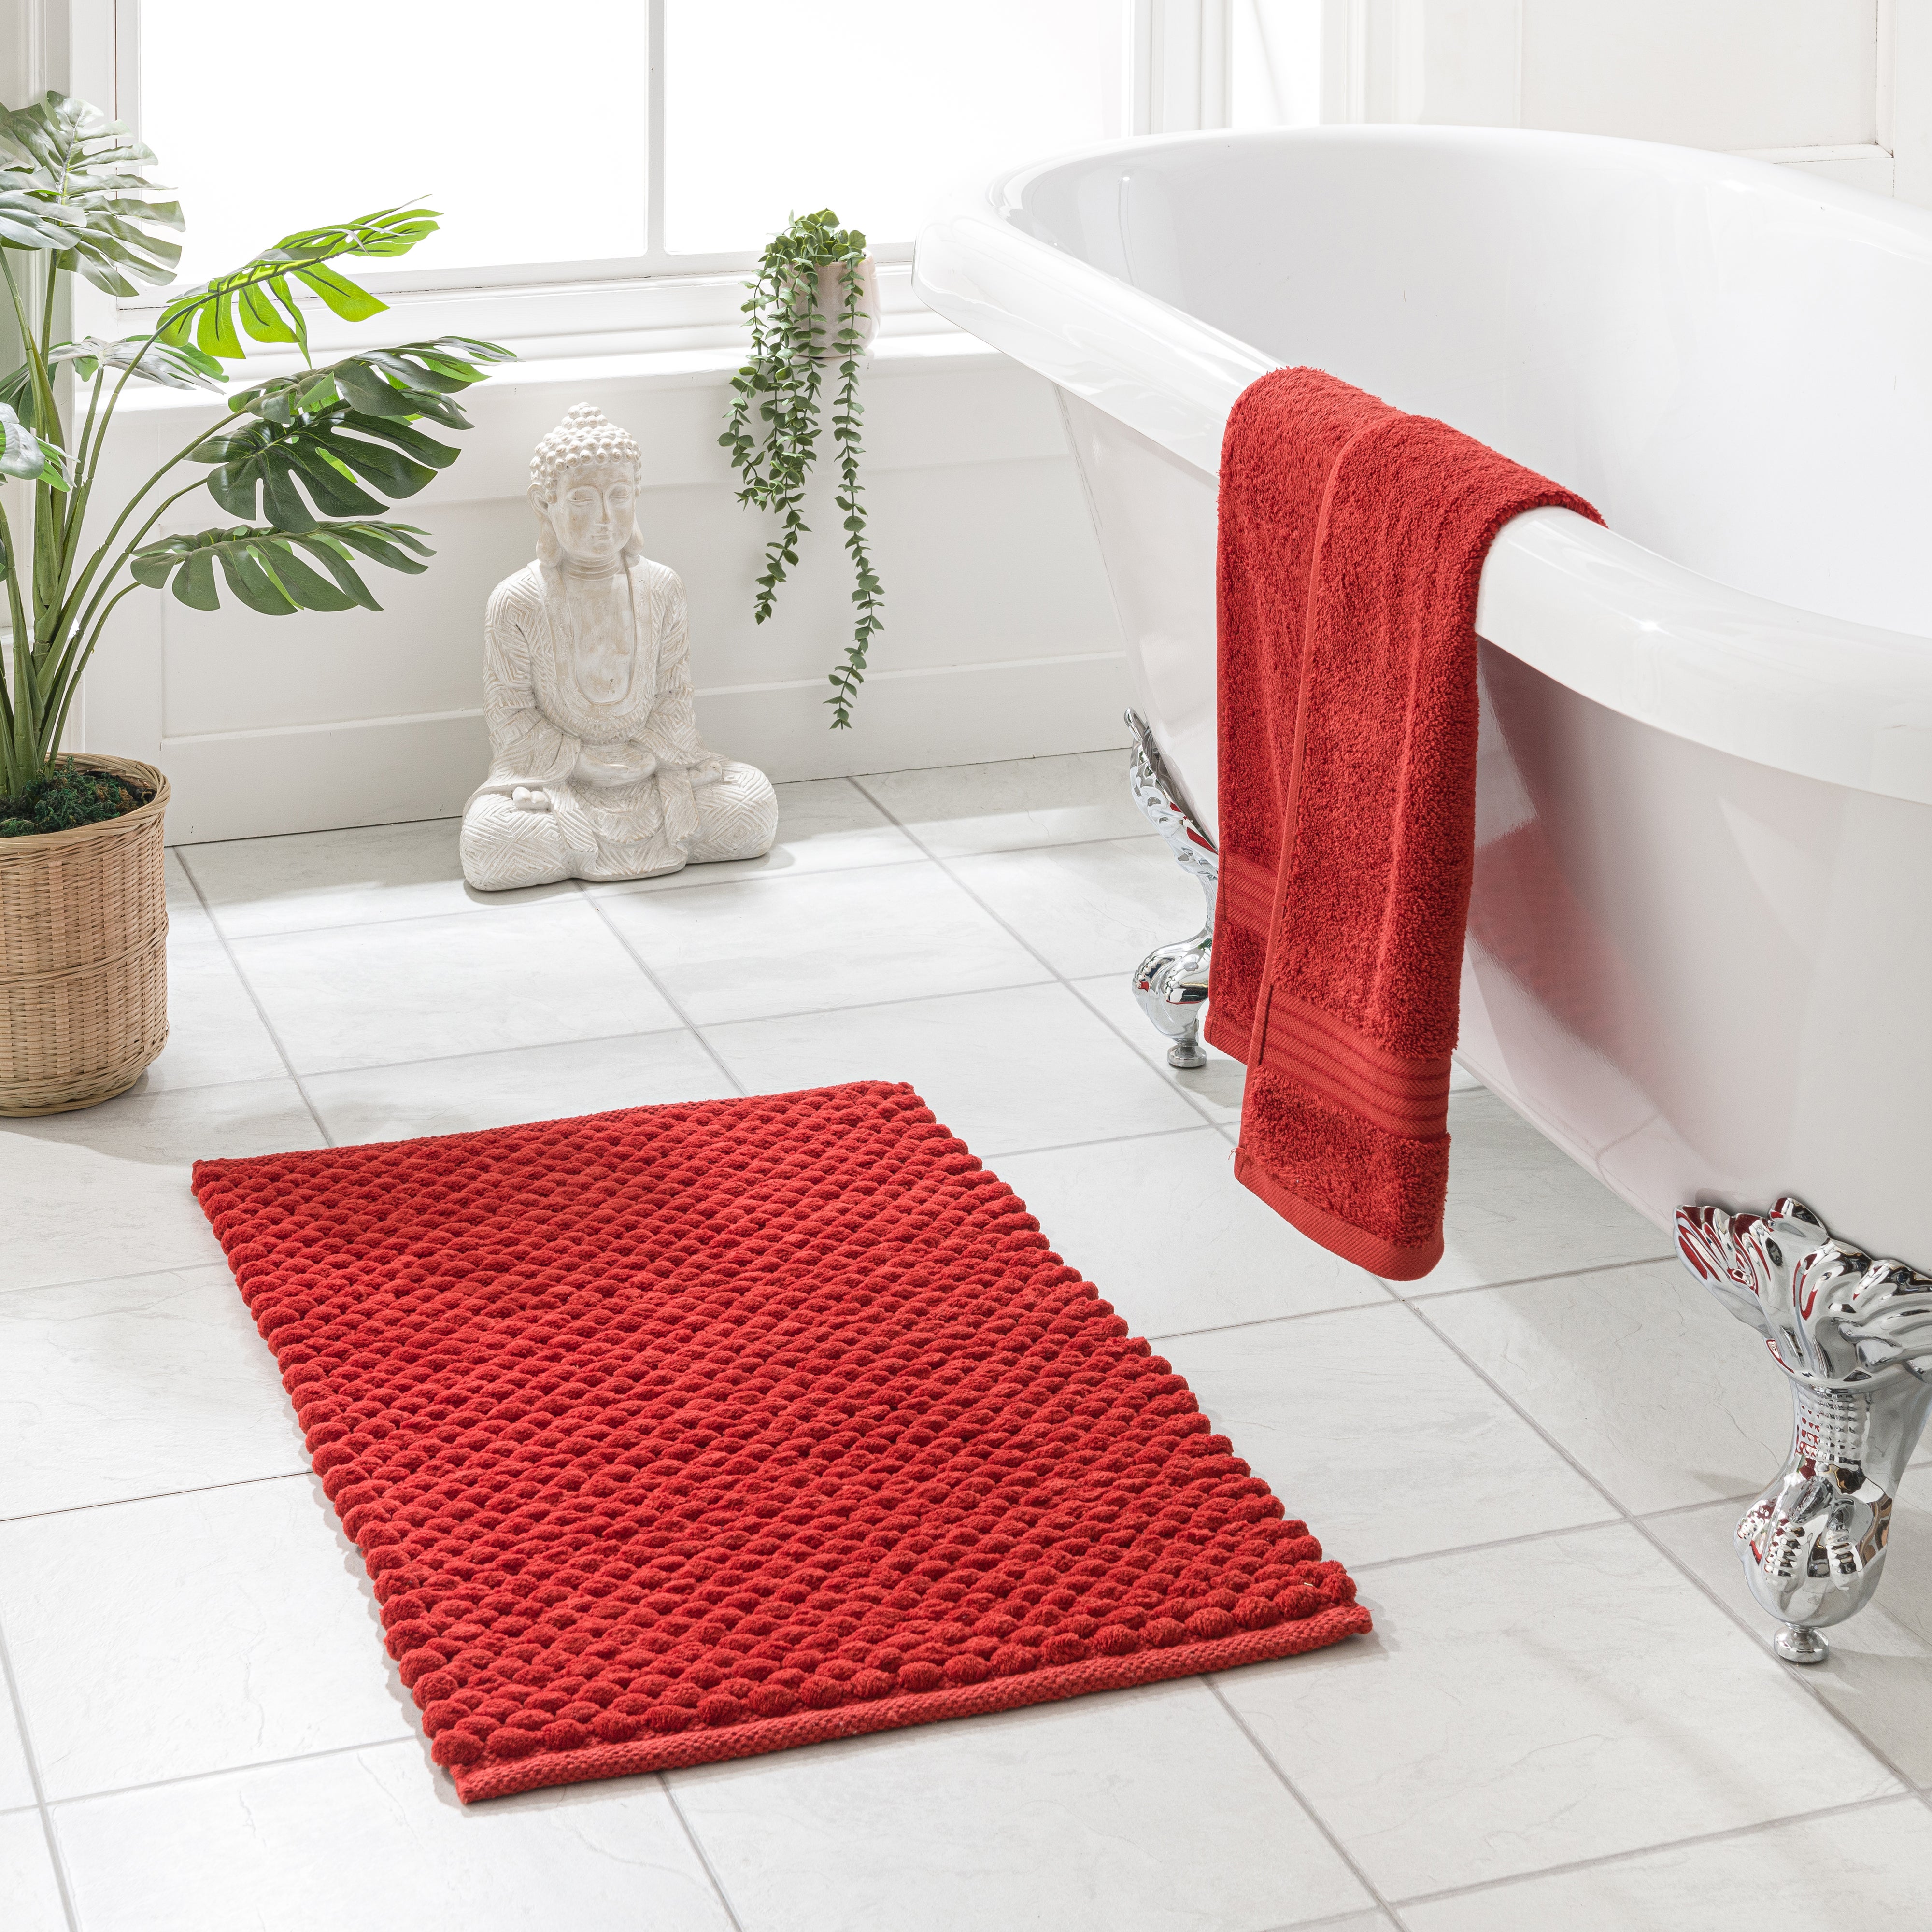 100 Recycled Pebble Bath Mat Red